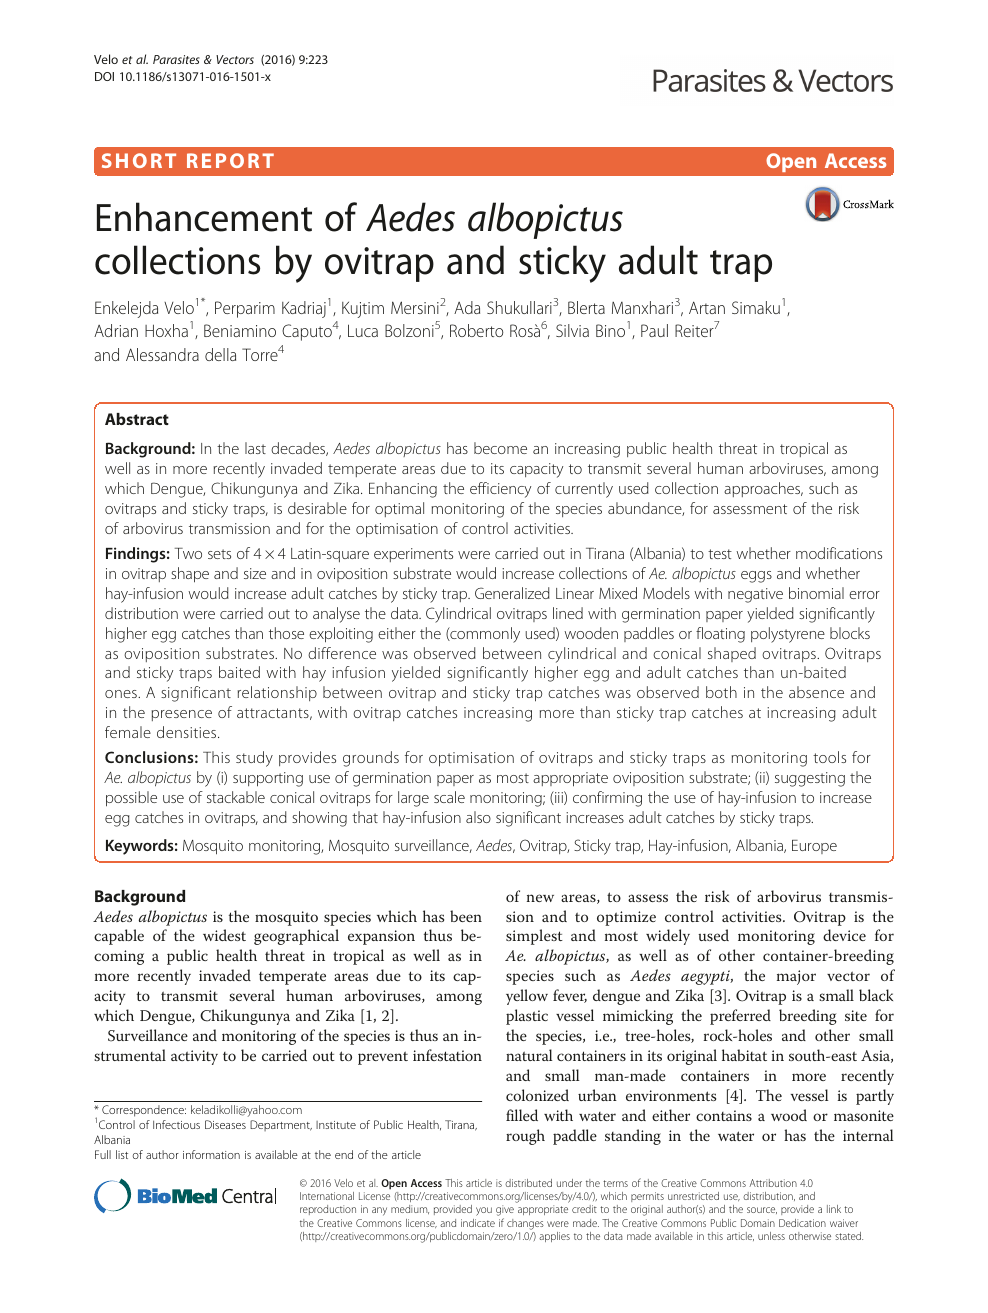 Enhancement Of Aedes Albopictus Collections By Ovitrap And Sticky Adult Trap Topic Of Research Paper In Biological Sciences Download Scholarly Article Pdf And Read For Free On Cyberleninka Open Science Hub